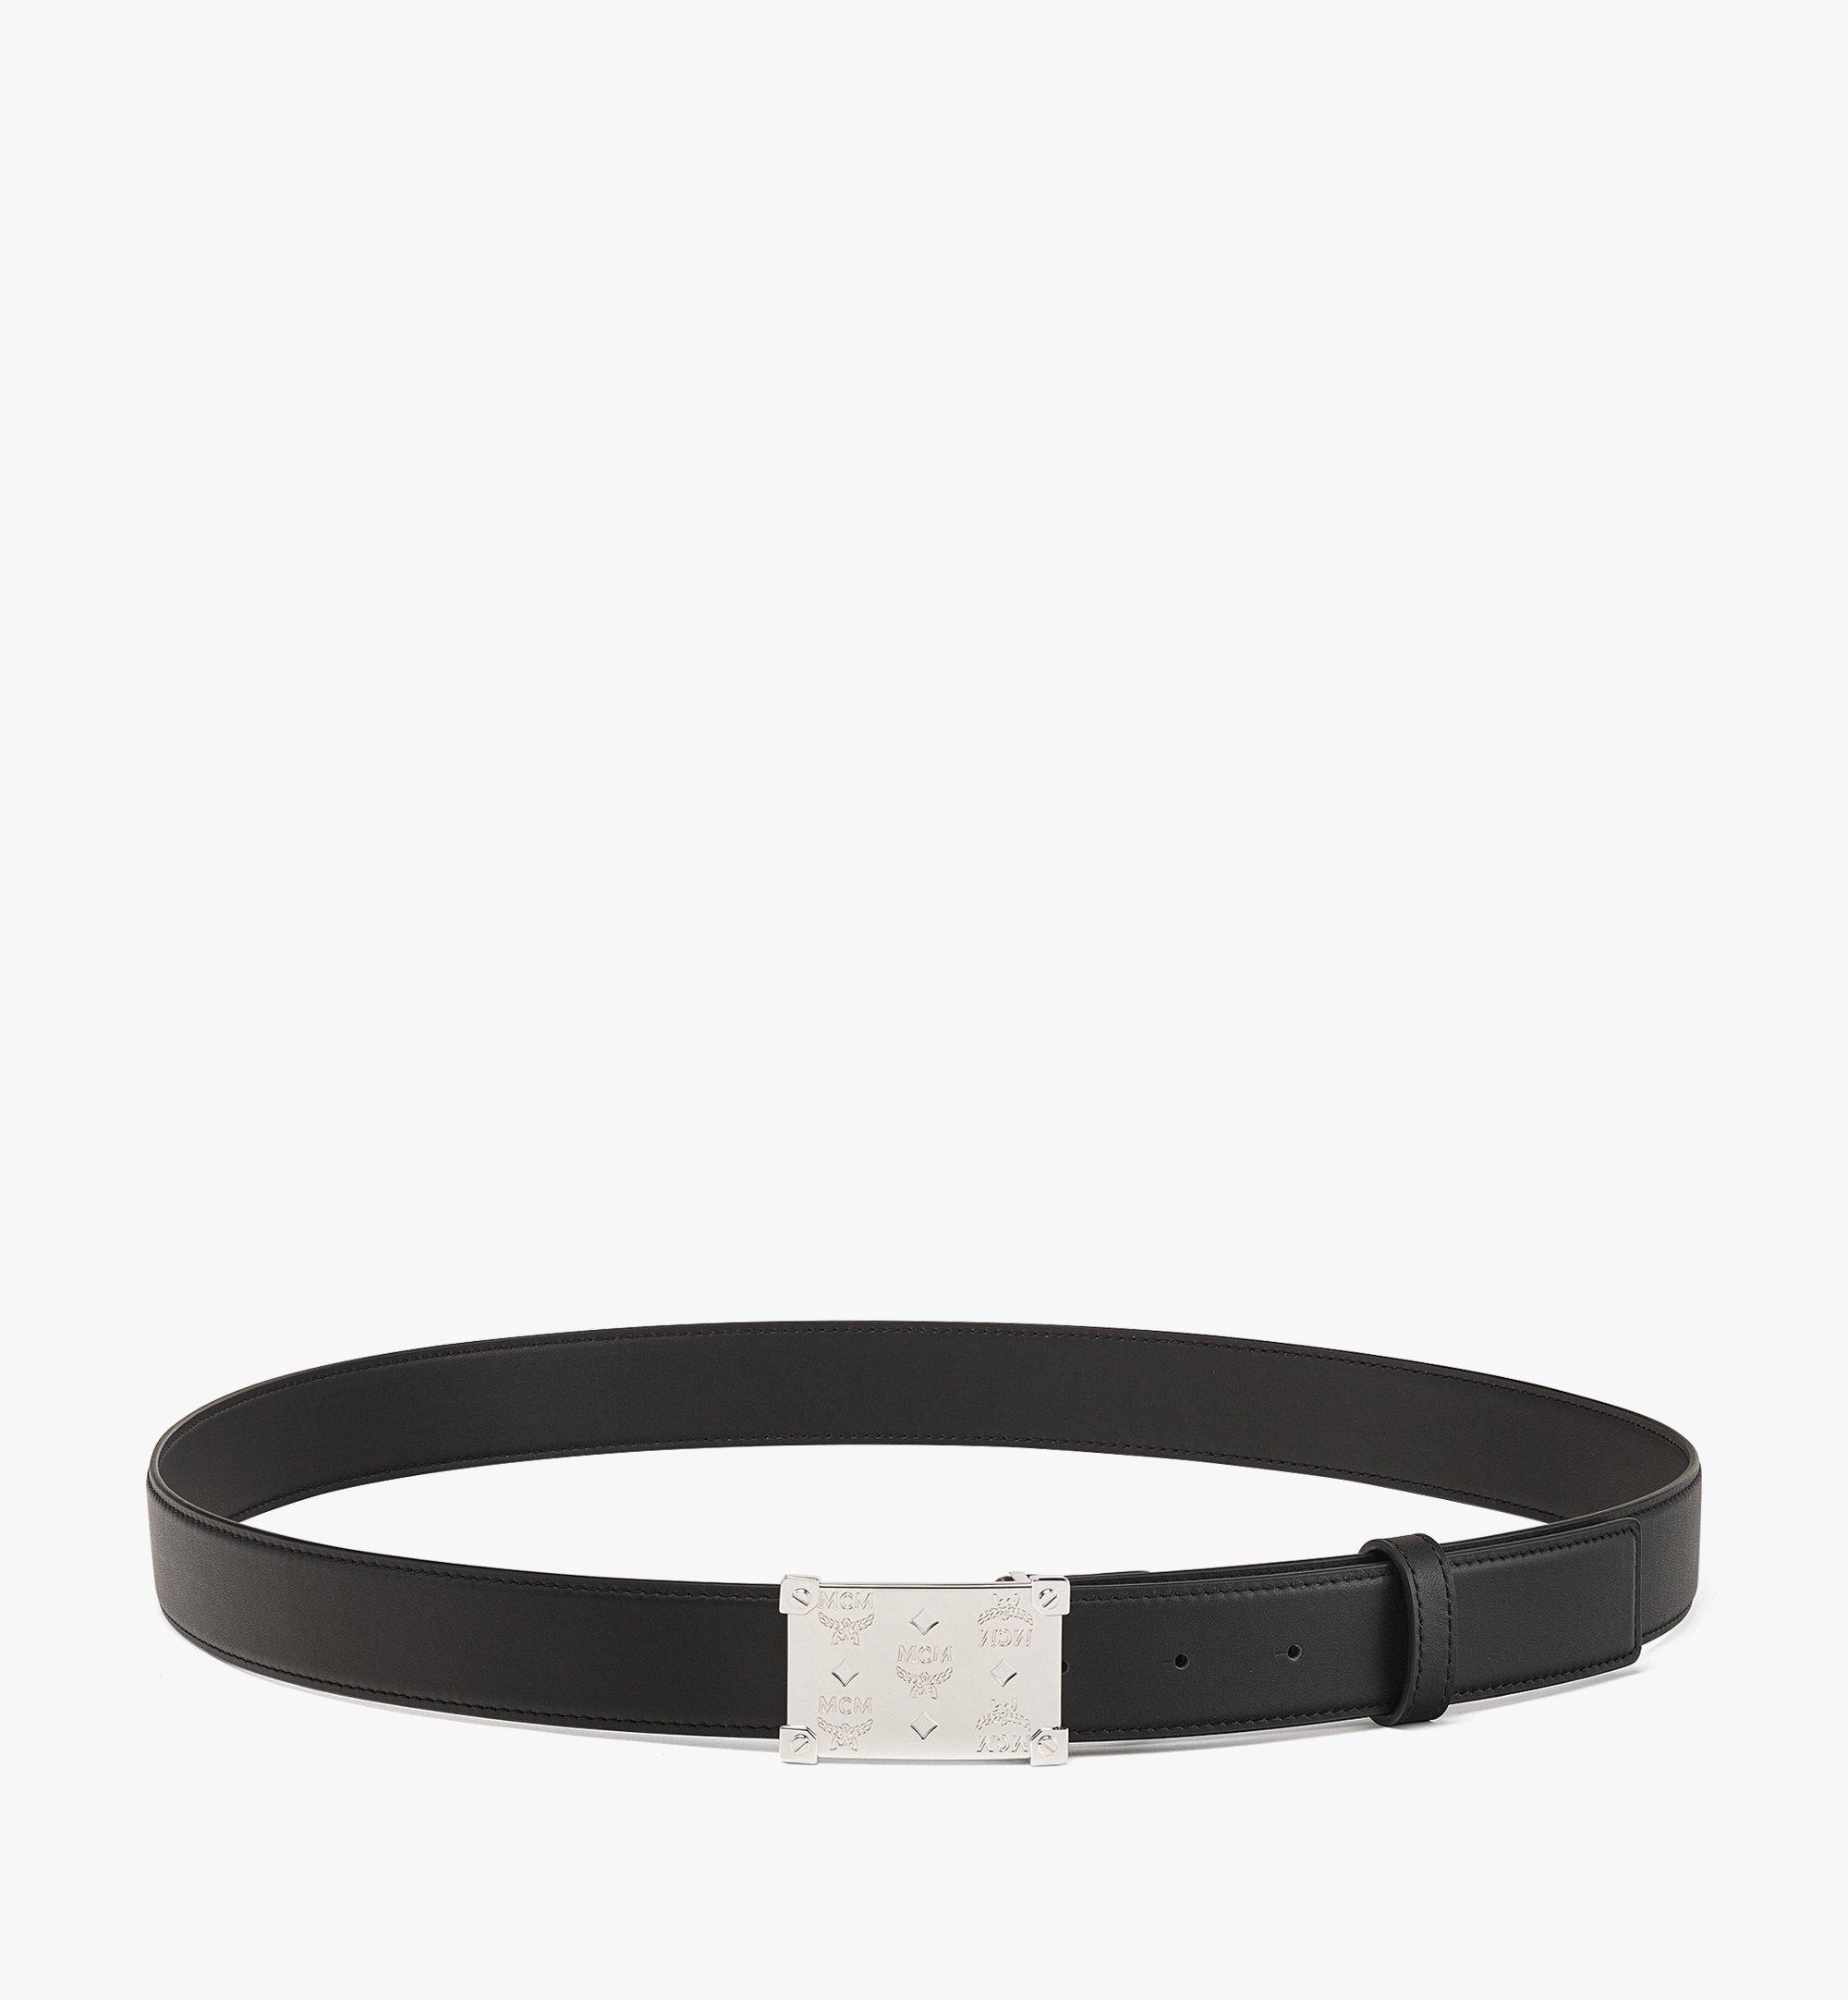 LV Heritage 35mm Reversible Belt Other Leathers - Accessories